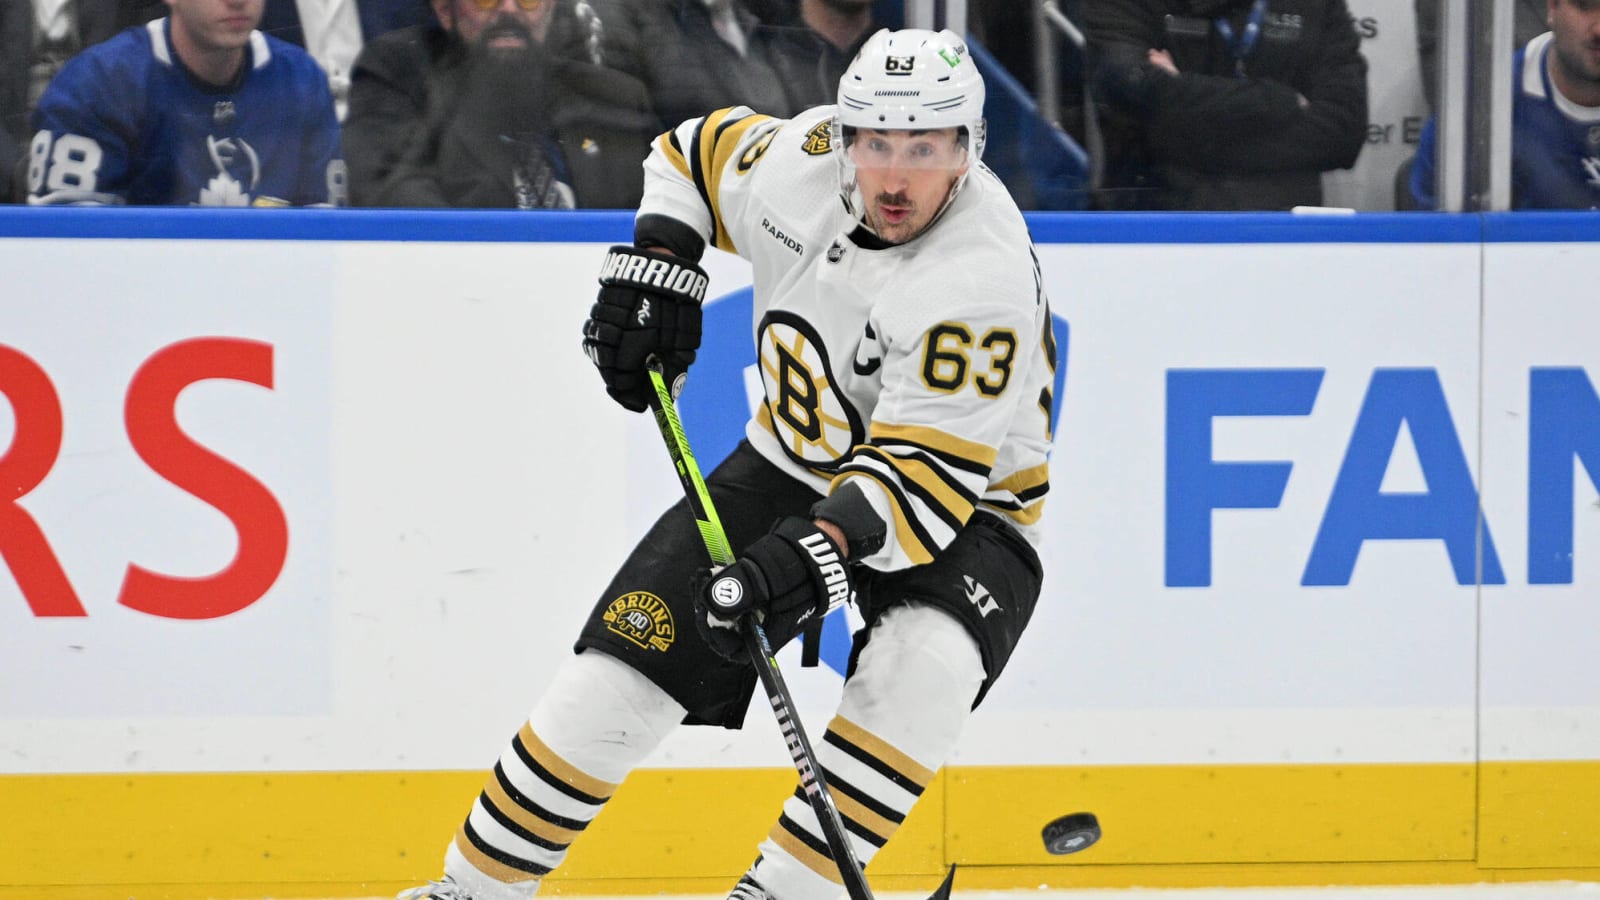 Marchand On Bennett: ‘I Think He Got Away With One’